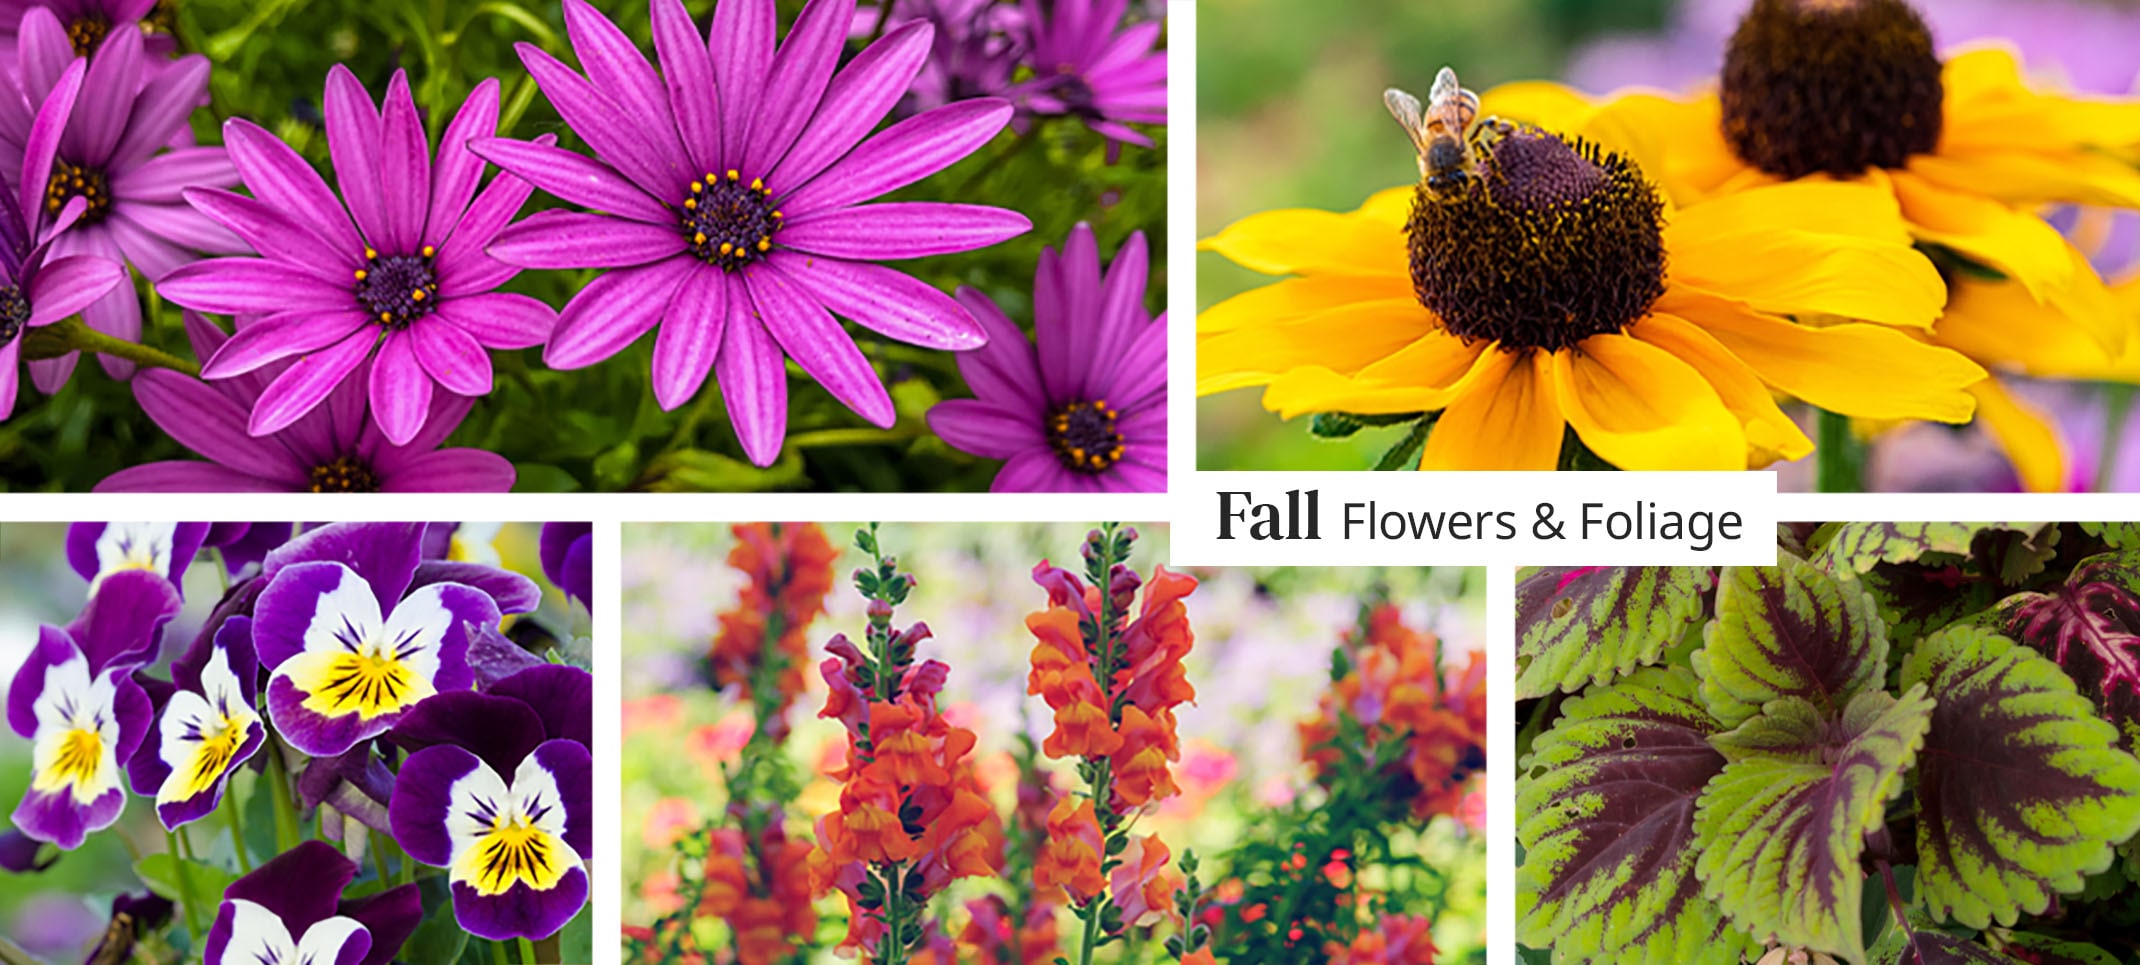 fall flowers and foliage with osteospermum, pansies, rudbeckias, snapdragons and coleus